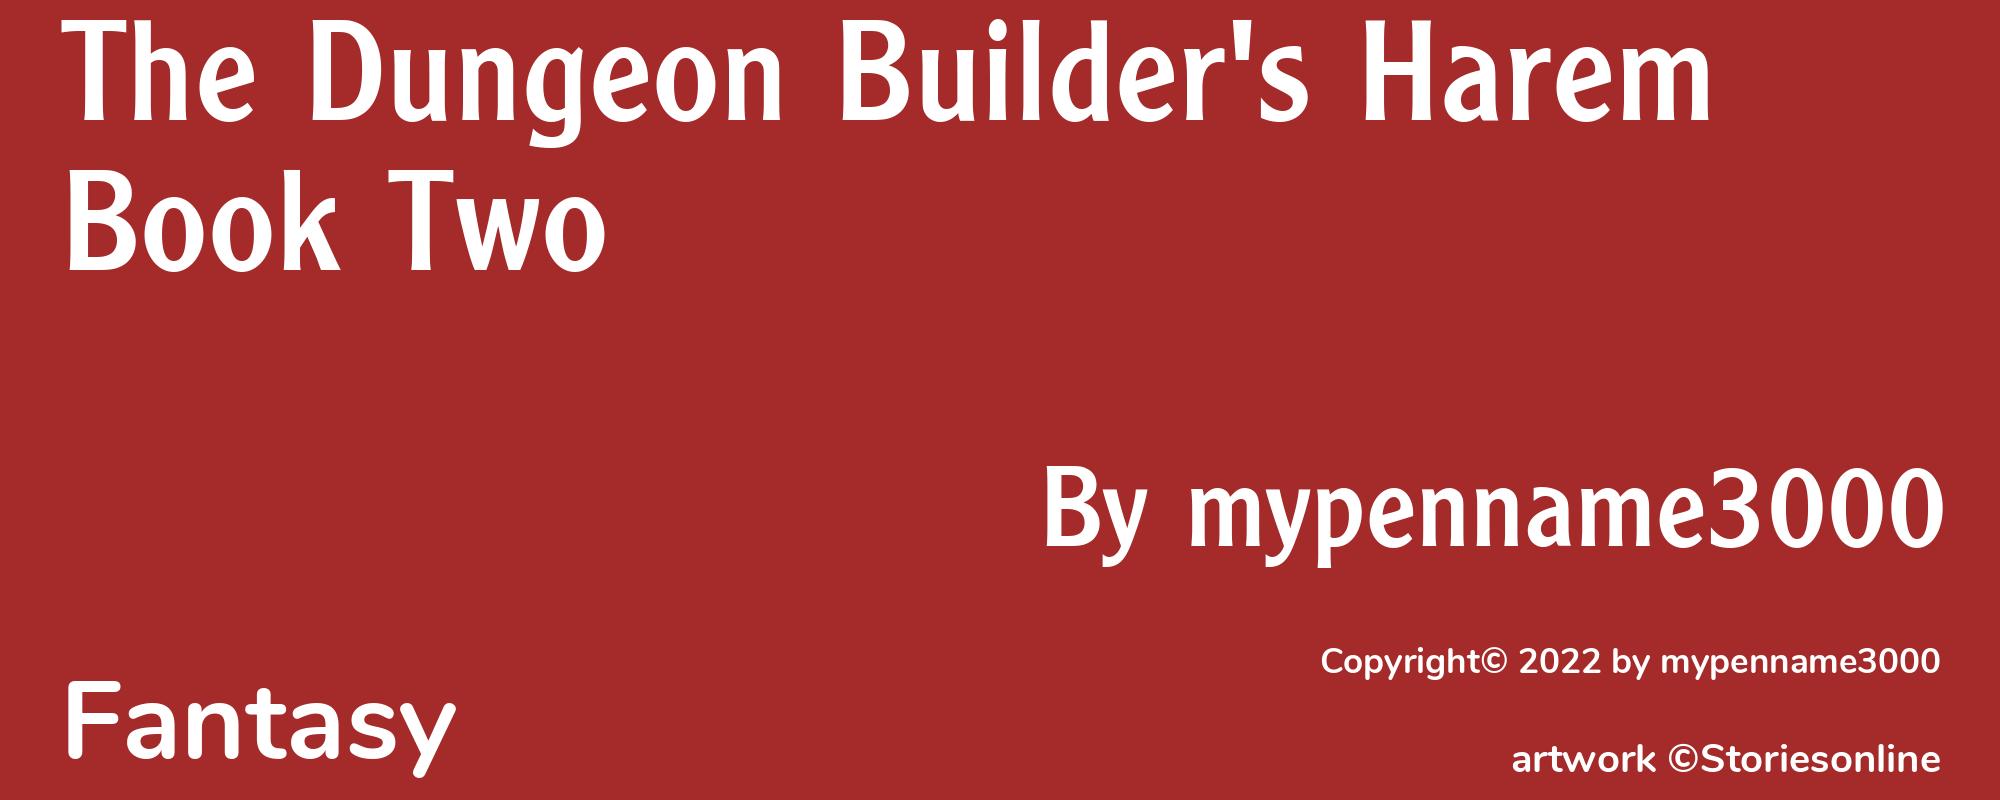 The Dungeon Builder's Harem Book Two - Cover